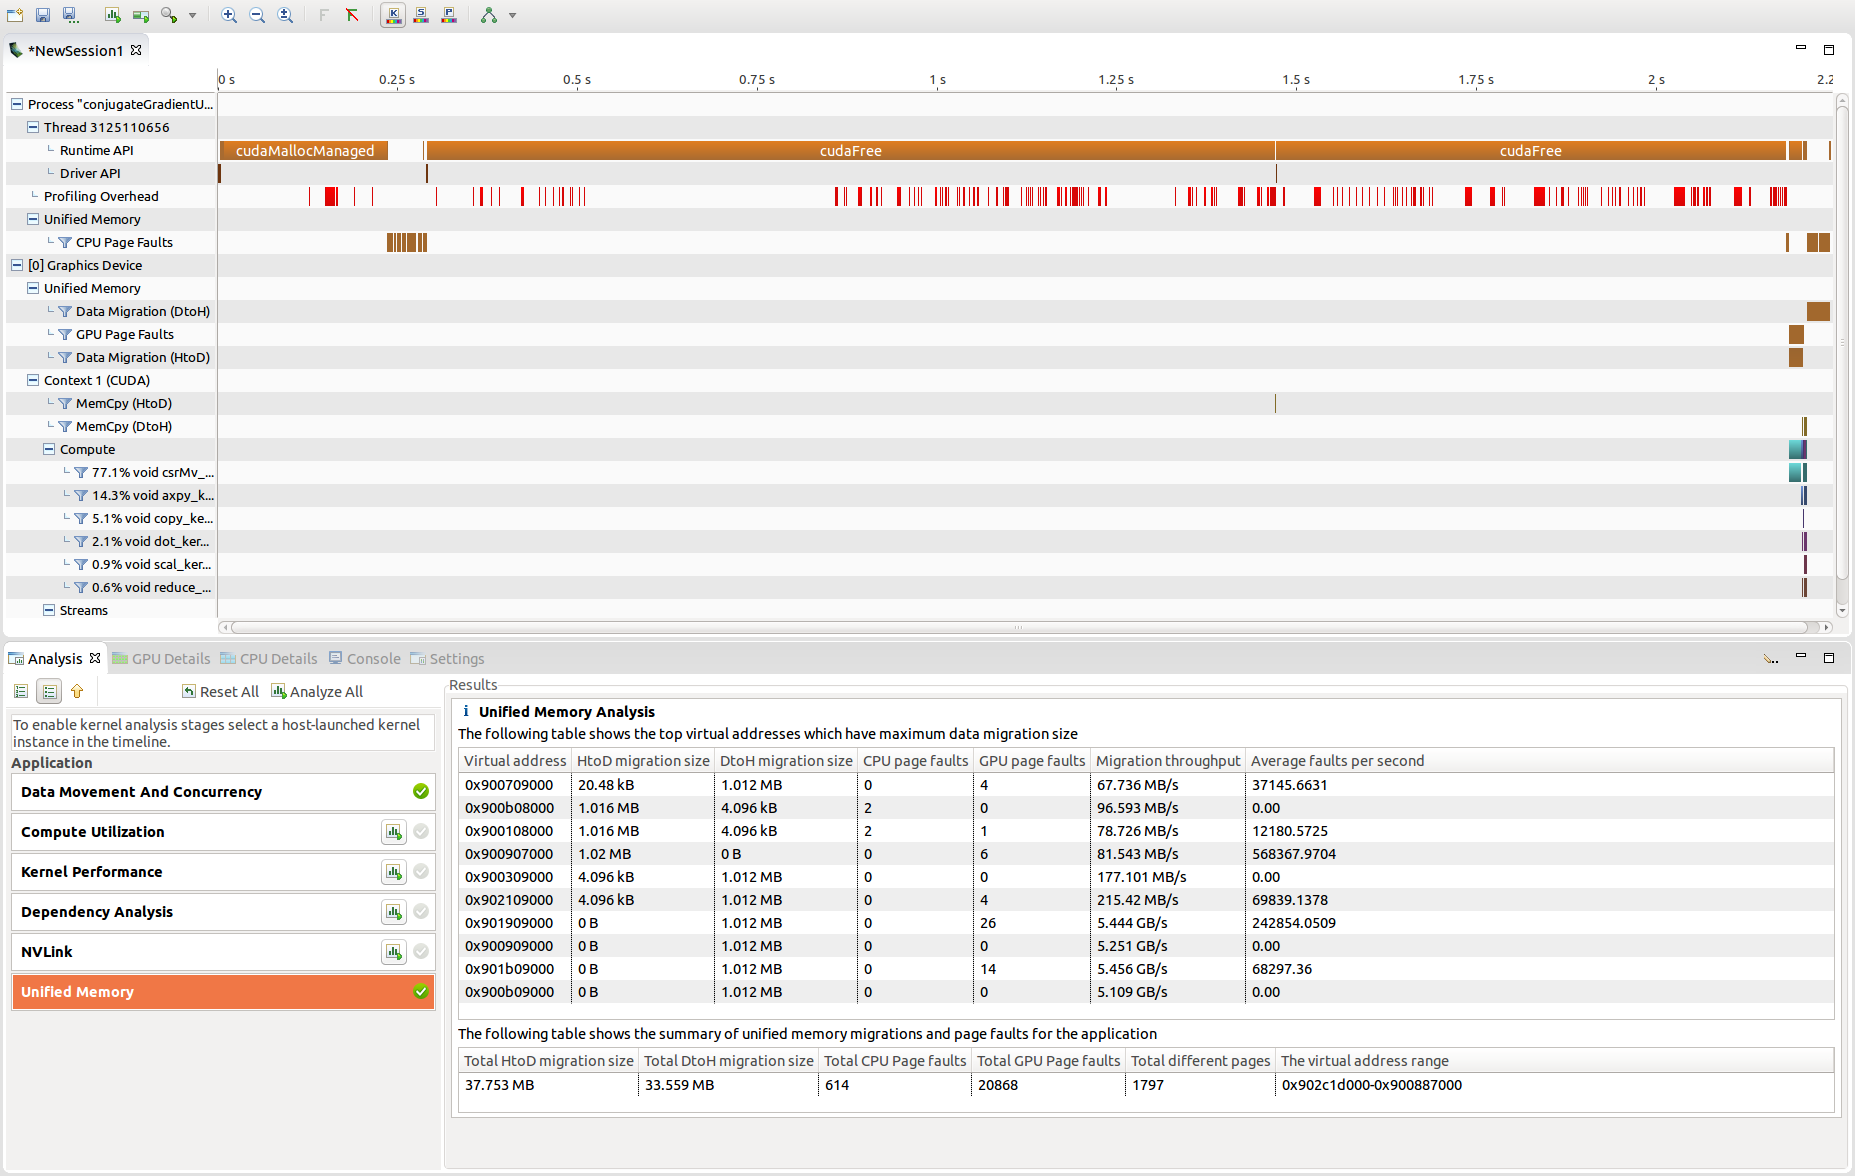 Unified memory analysis view gives the summary of the data migrations, cpu and gpu page faults.